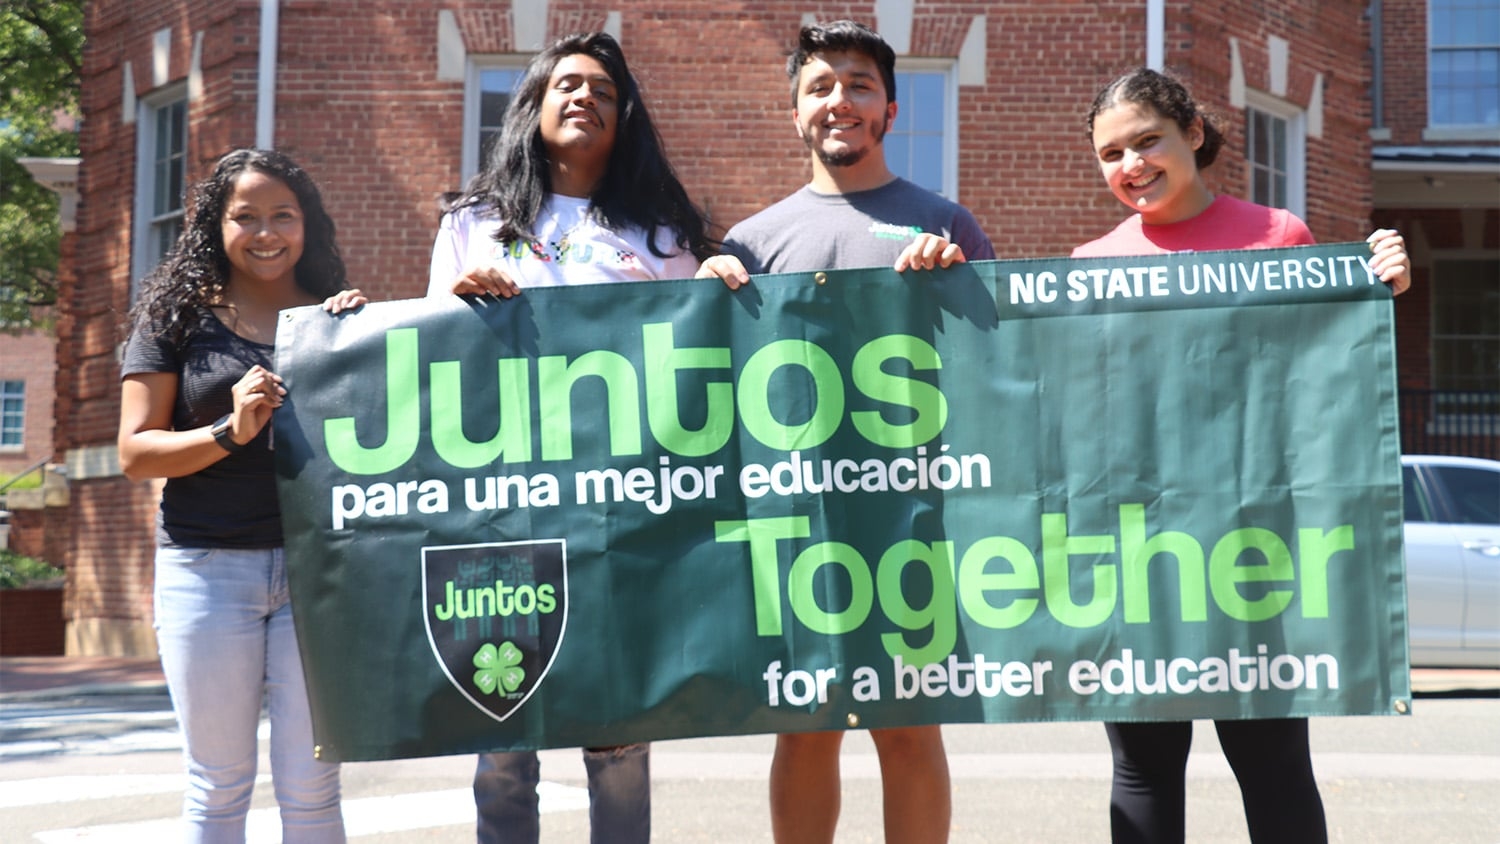 Juntos staff and students hold up a large sign for the organization on campus